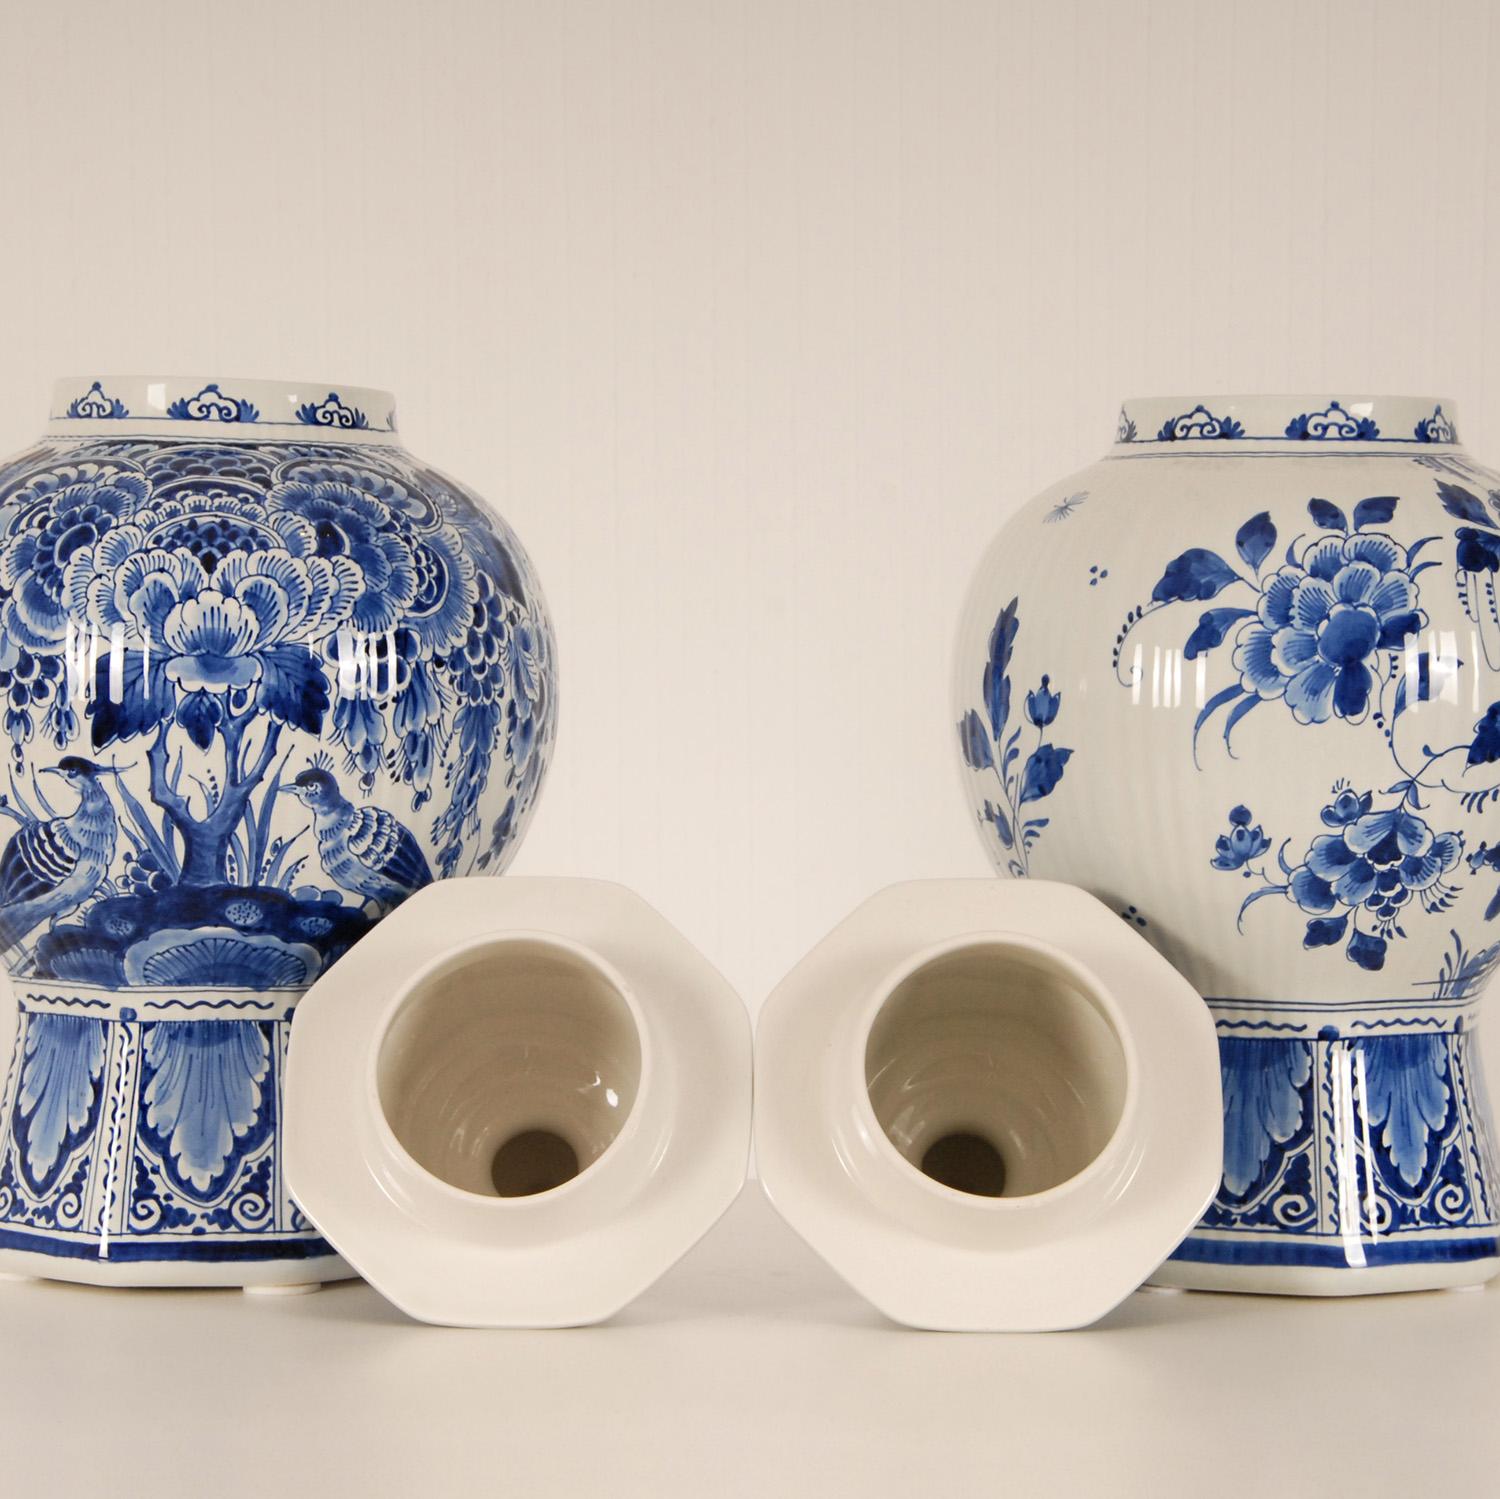 Hand-Crafted Royal Delft Baluster Vases Earthenware Blue White Ceramic Covered Jars -  a pair For Sale